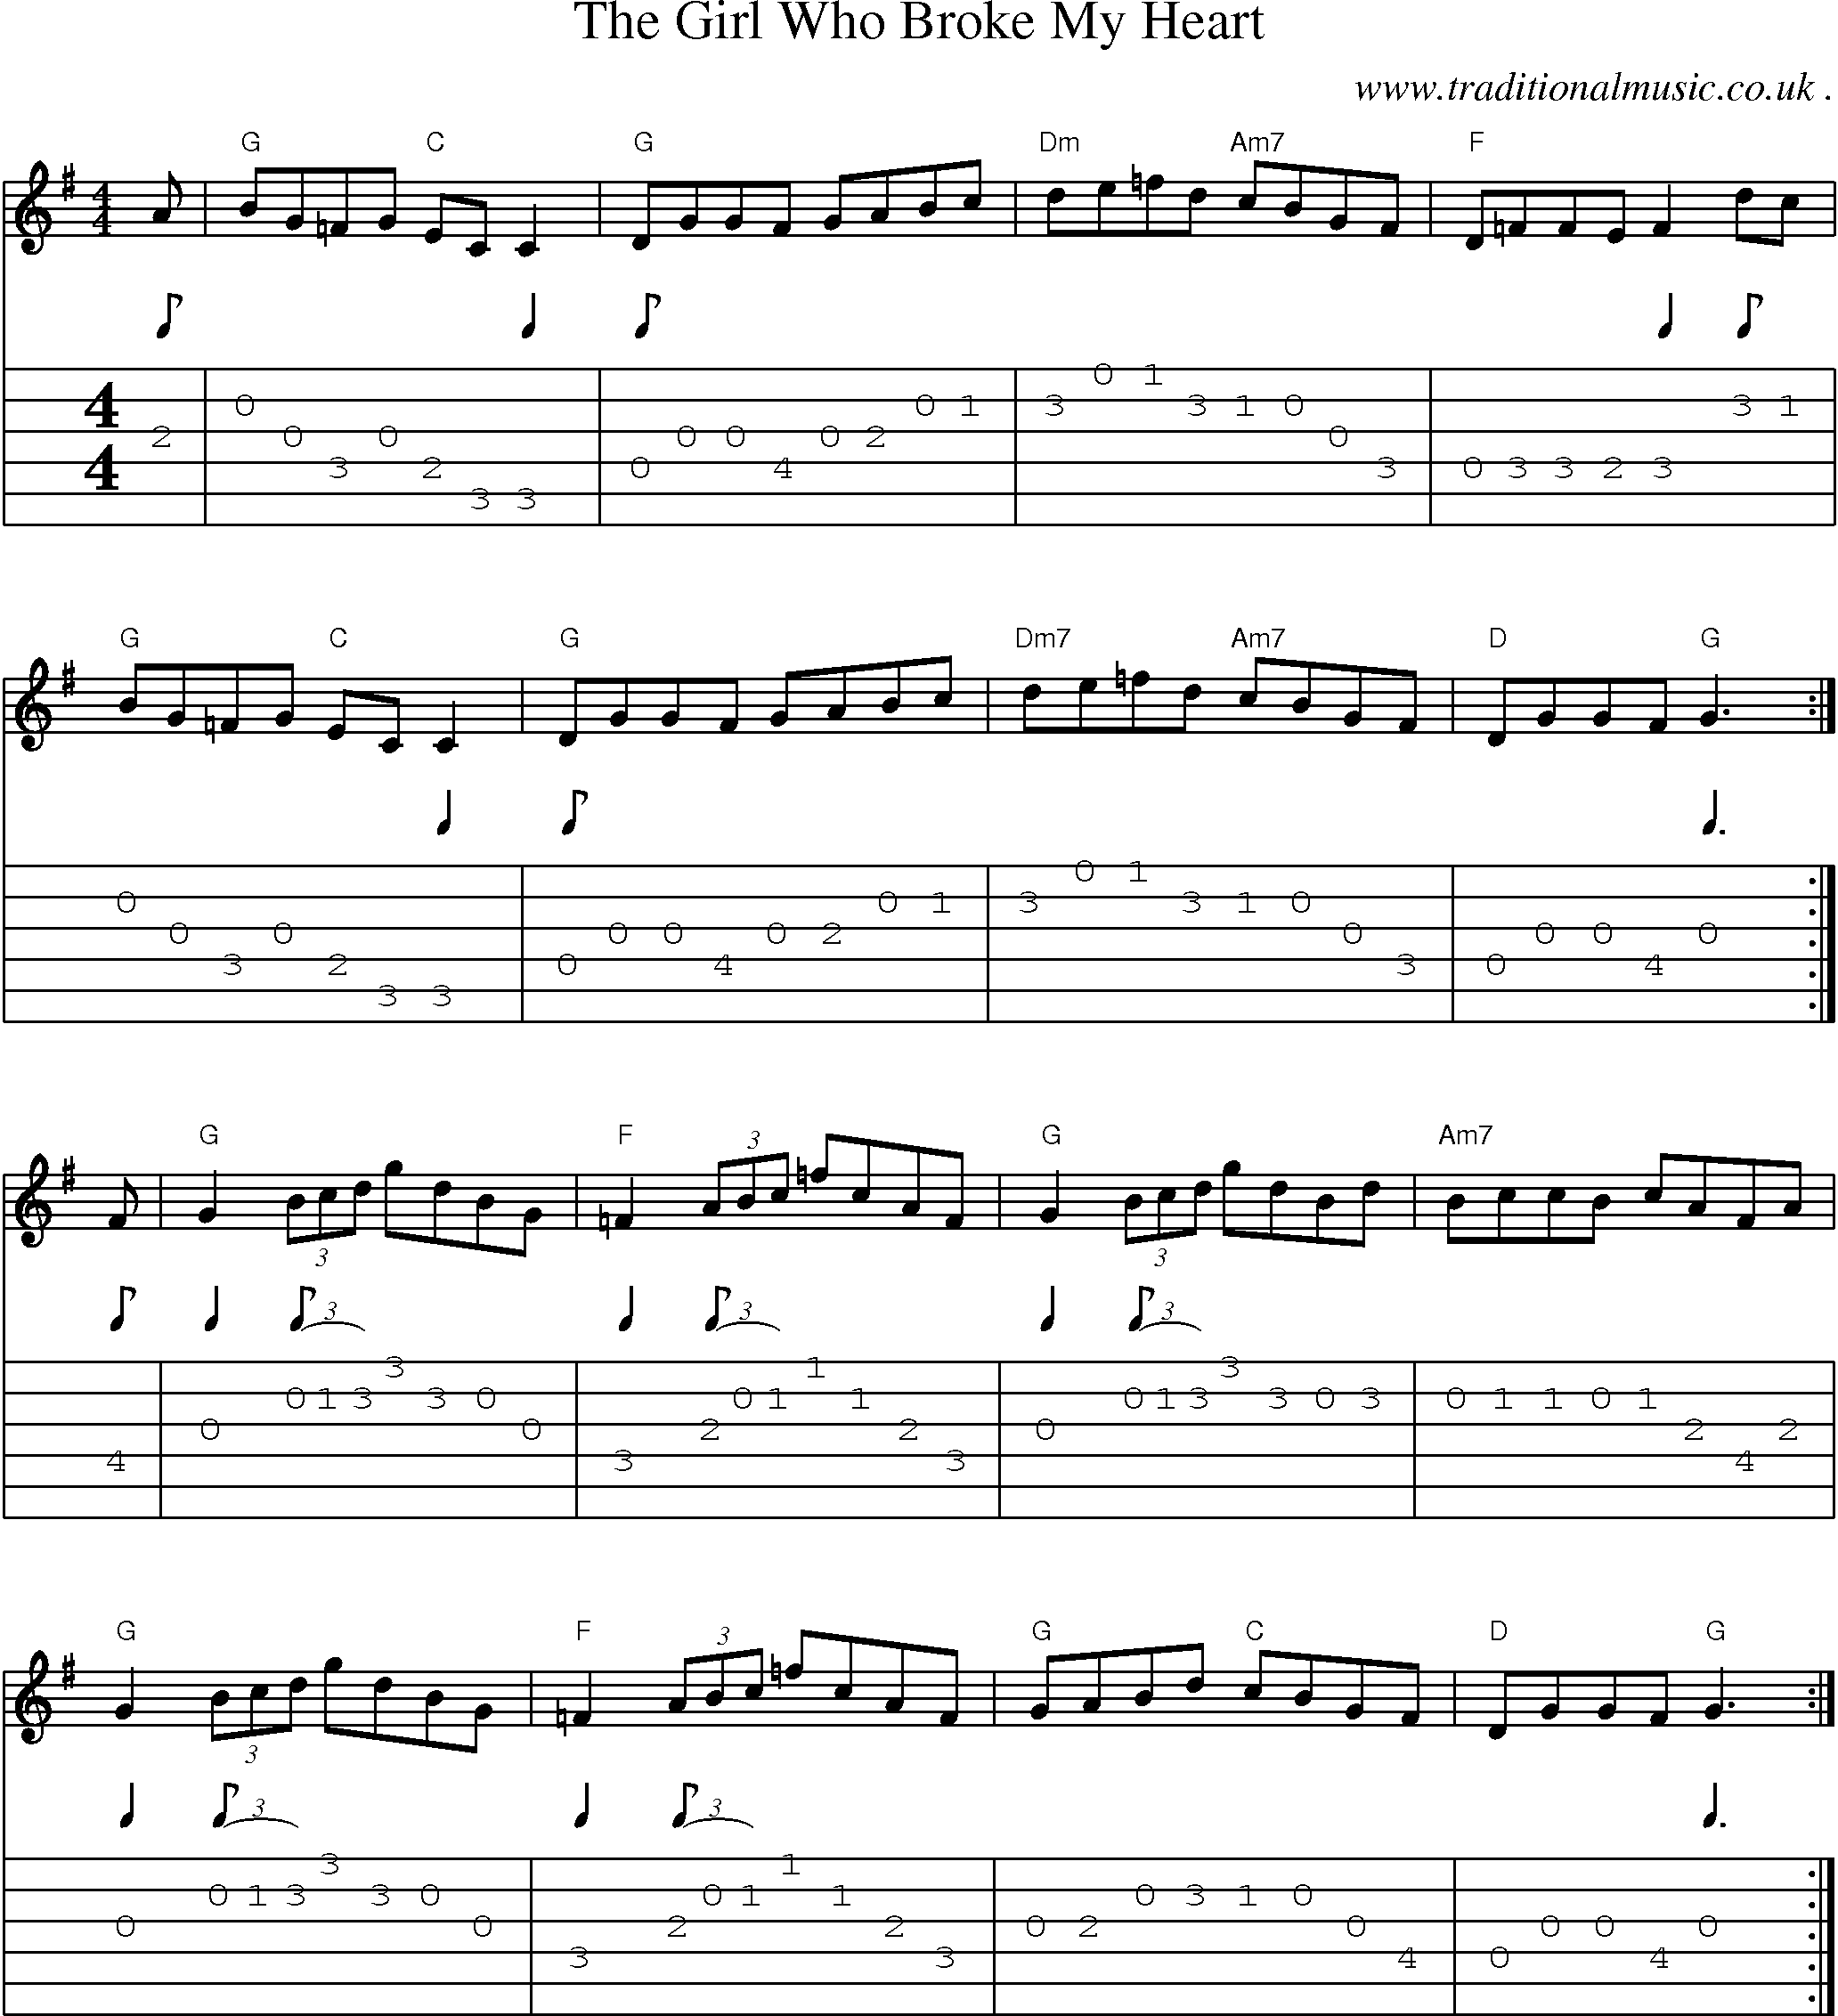 Music Score and Guitar Tabs for The Girl Who Broke My Heart